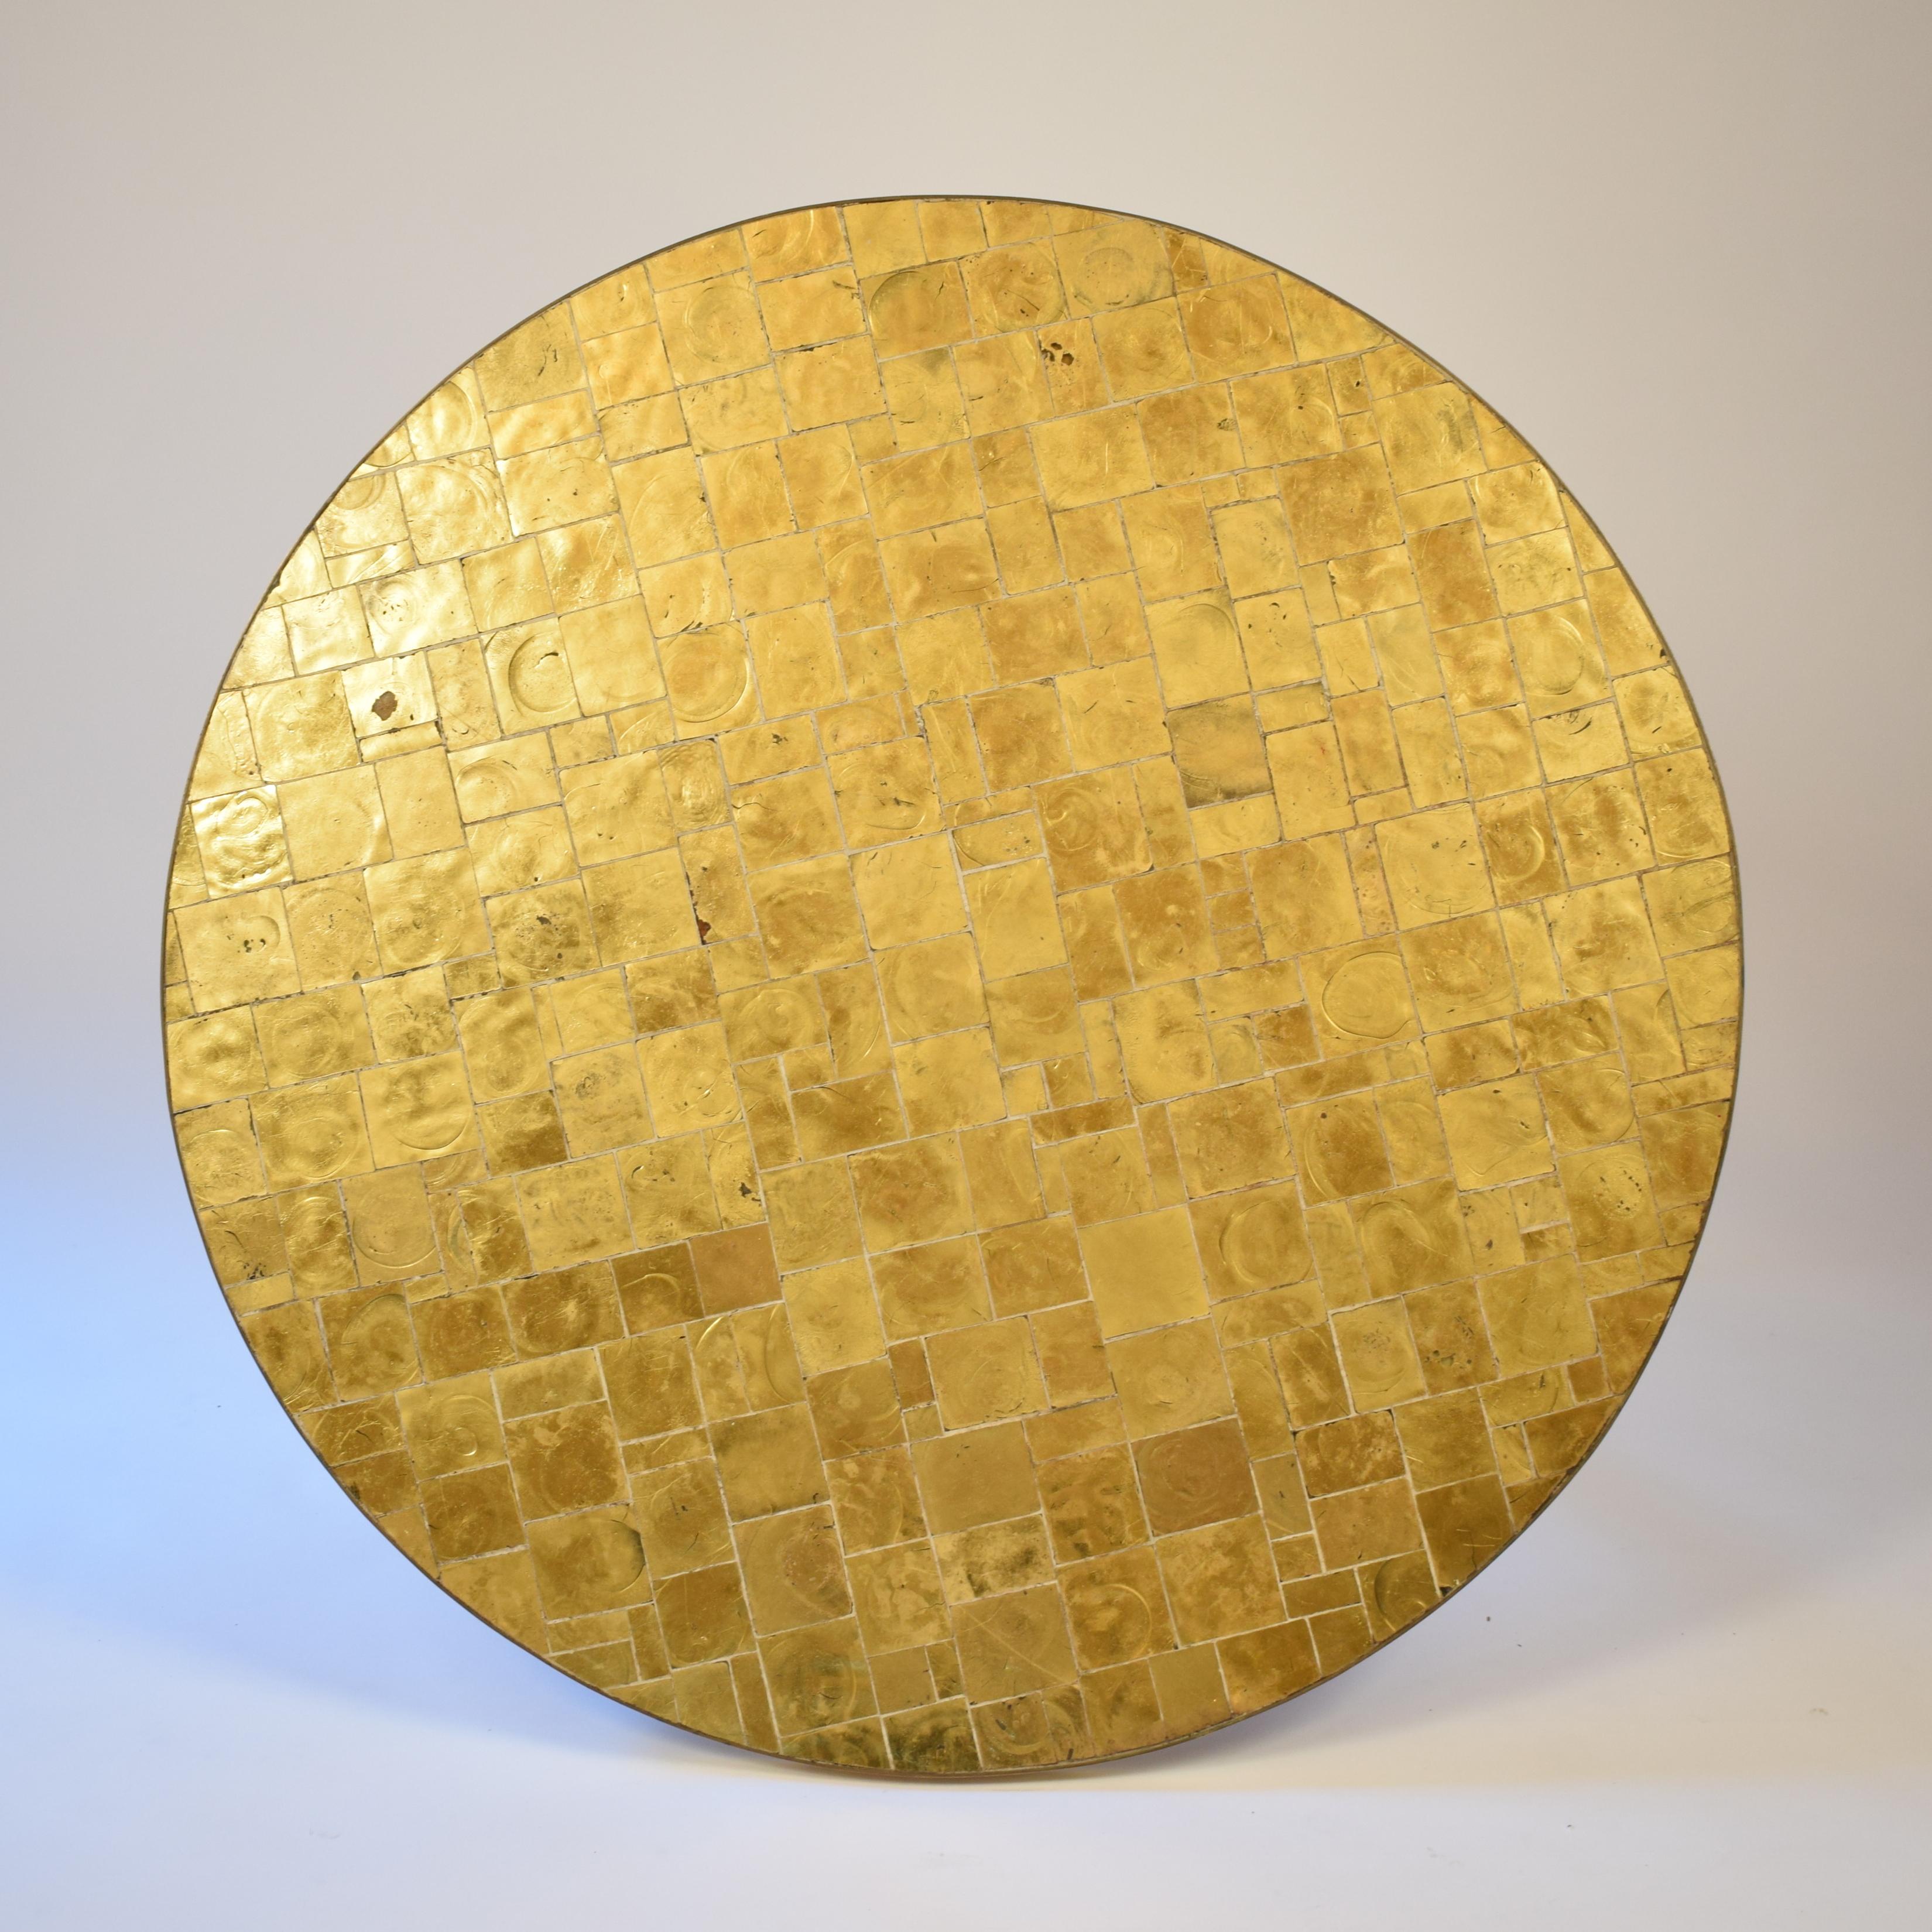 This elegant and beautiful round dining table was made in the 1970s. It has a gilded glass tiles top and the base is made out of brass.
A very unique and unusual piece. The tabletop has a very nice warm golden shine.
This piece of furniture is a